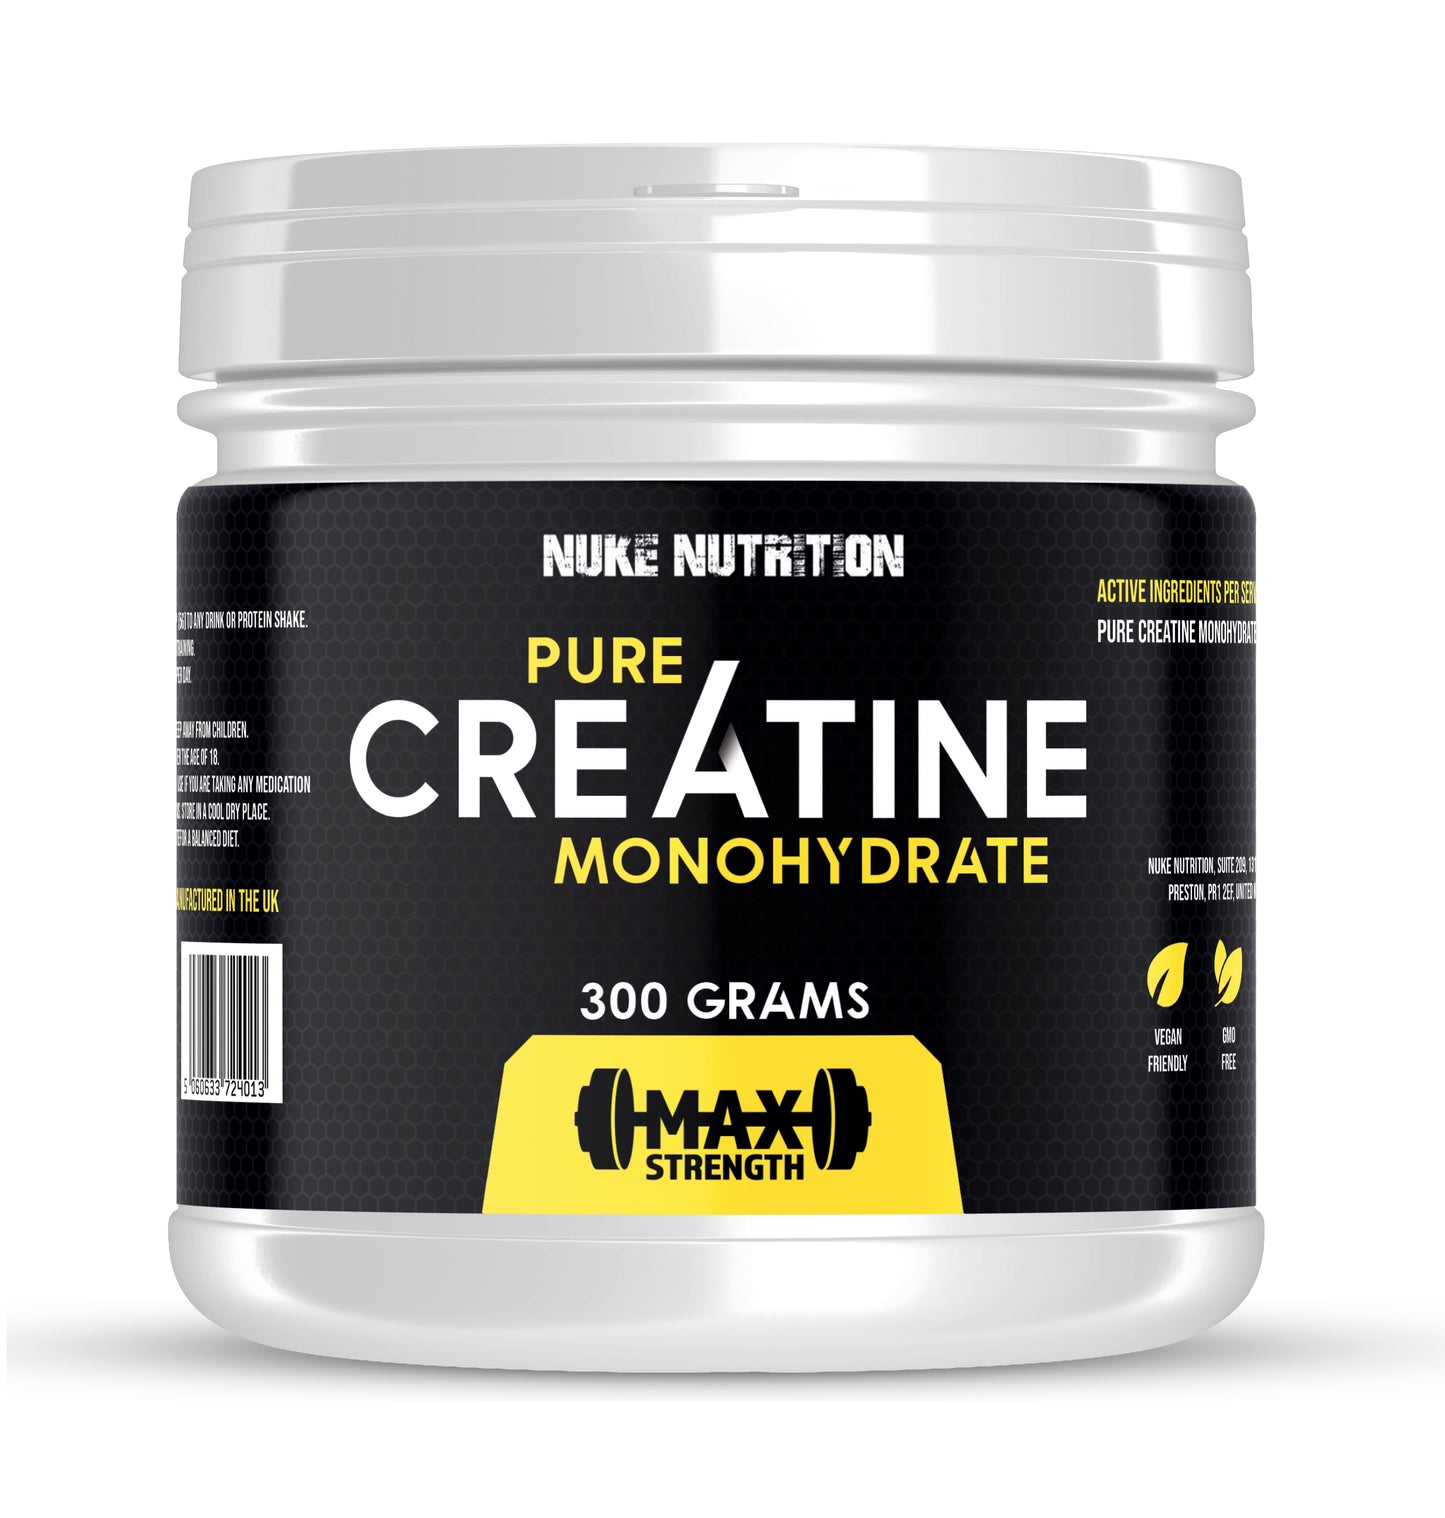 Creatine Monohydrate Powder 300g High Strength & Micronised for Maximum Absorbency Muscle Growth & Strength